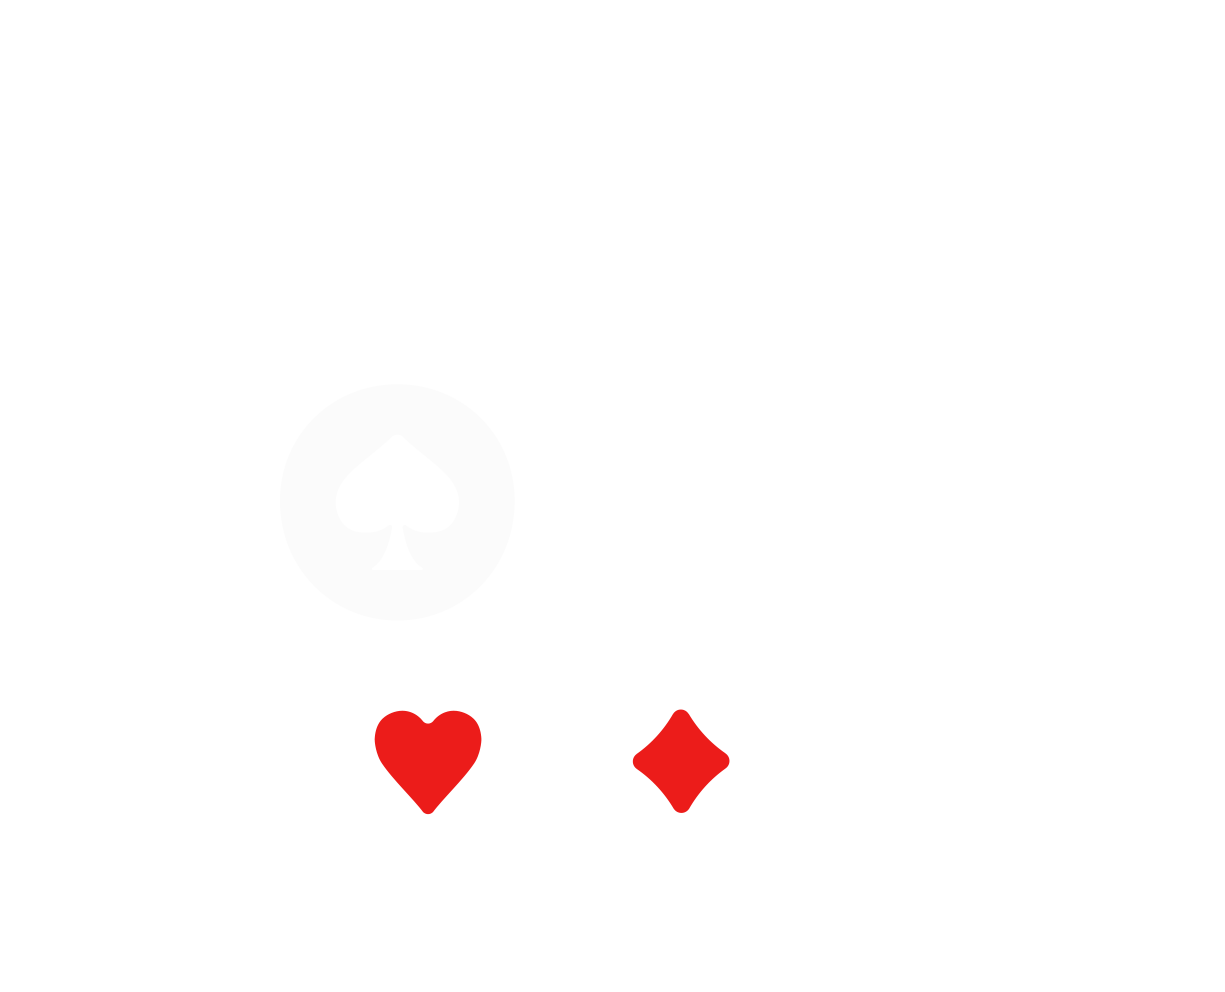 Review of the Best Global Poker Online Casino